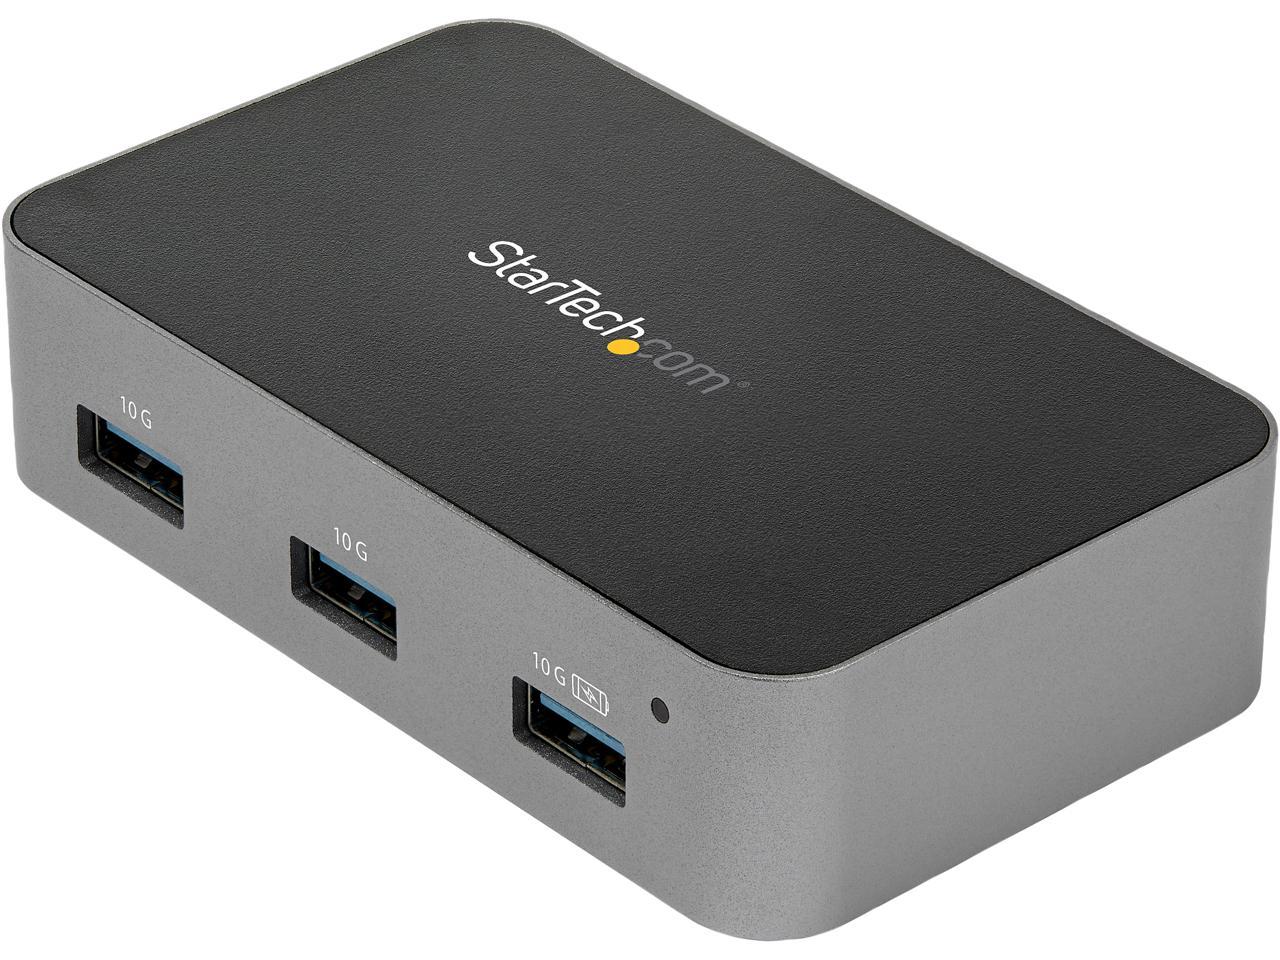 StarTech.com 4 Port USB C Hub with Power Adapter - USB 3.2 Gen 2 (10Gbps) - USB Type C to 4x USB-A - Self Powered Desktop USB Hub with Fast Charging Port (BC 1.2) - Desk Mountable - image 1 of 5